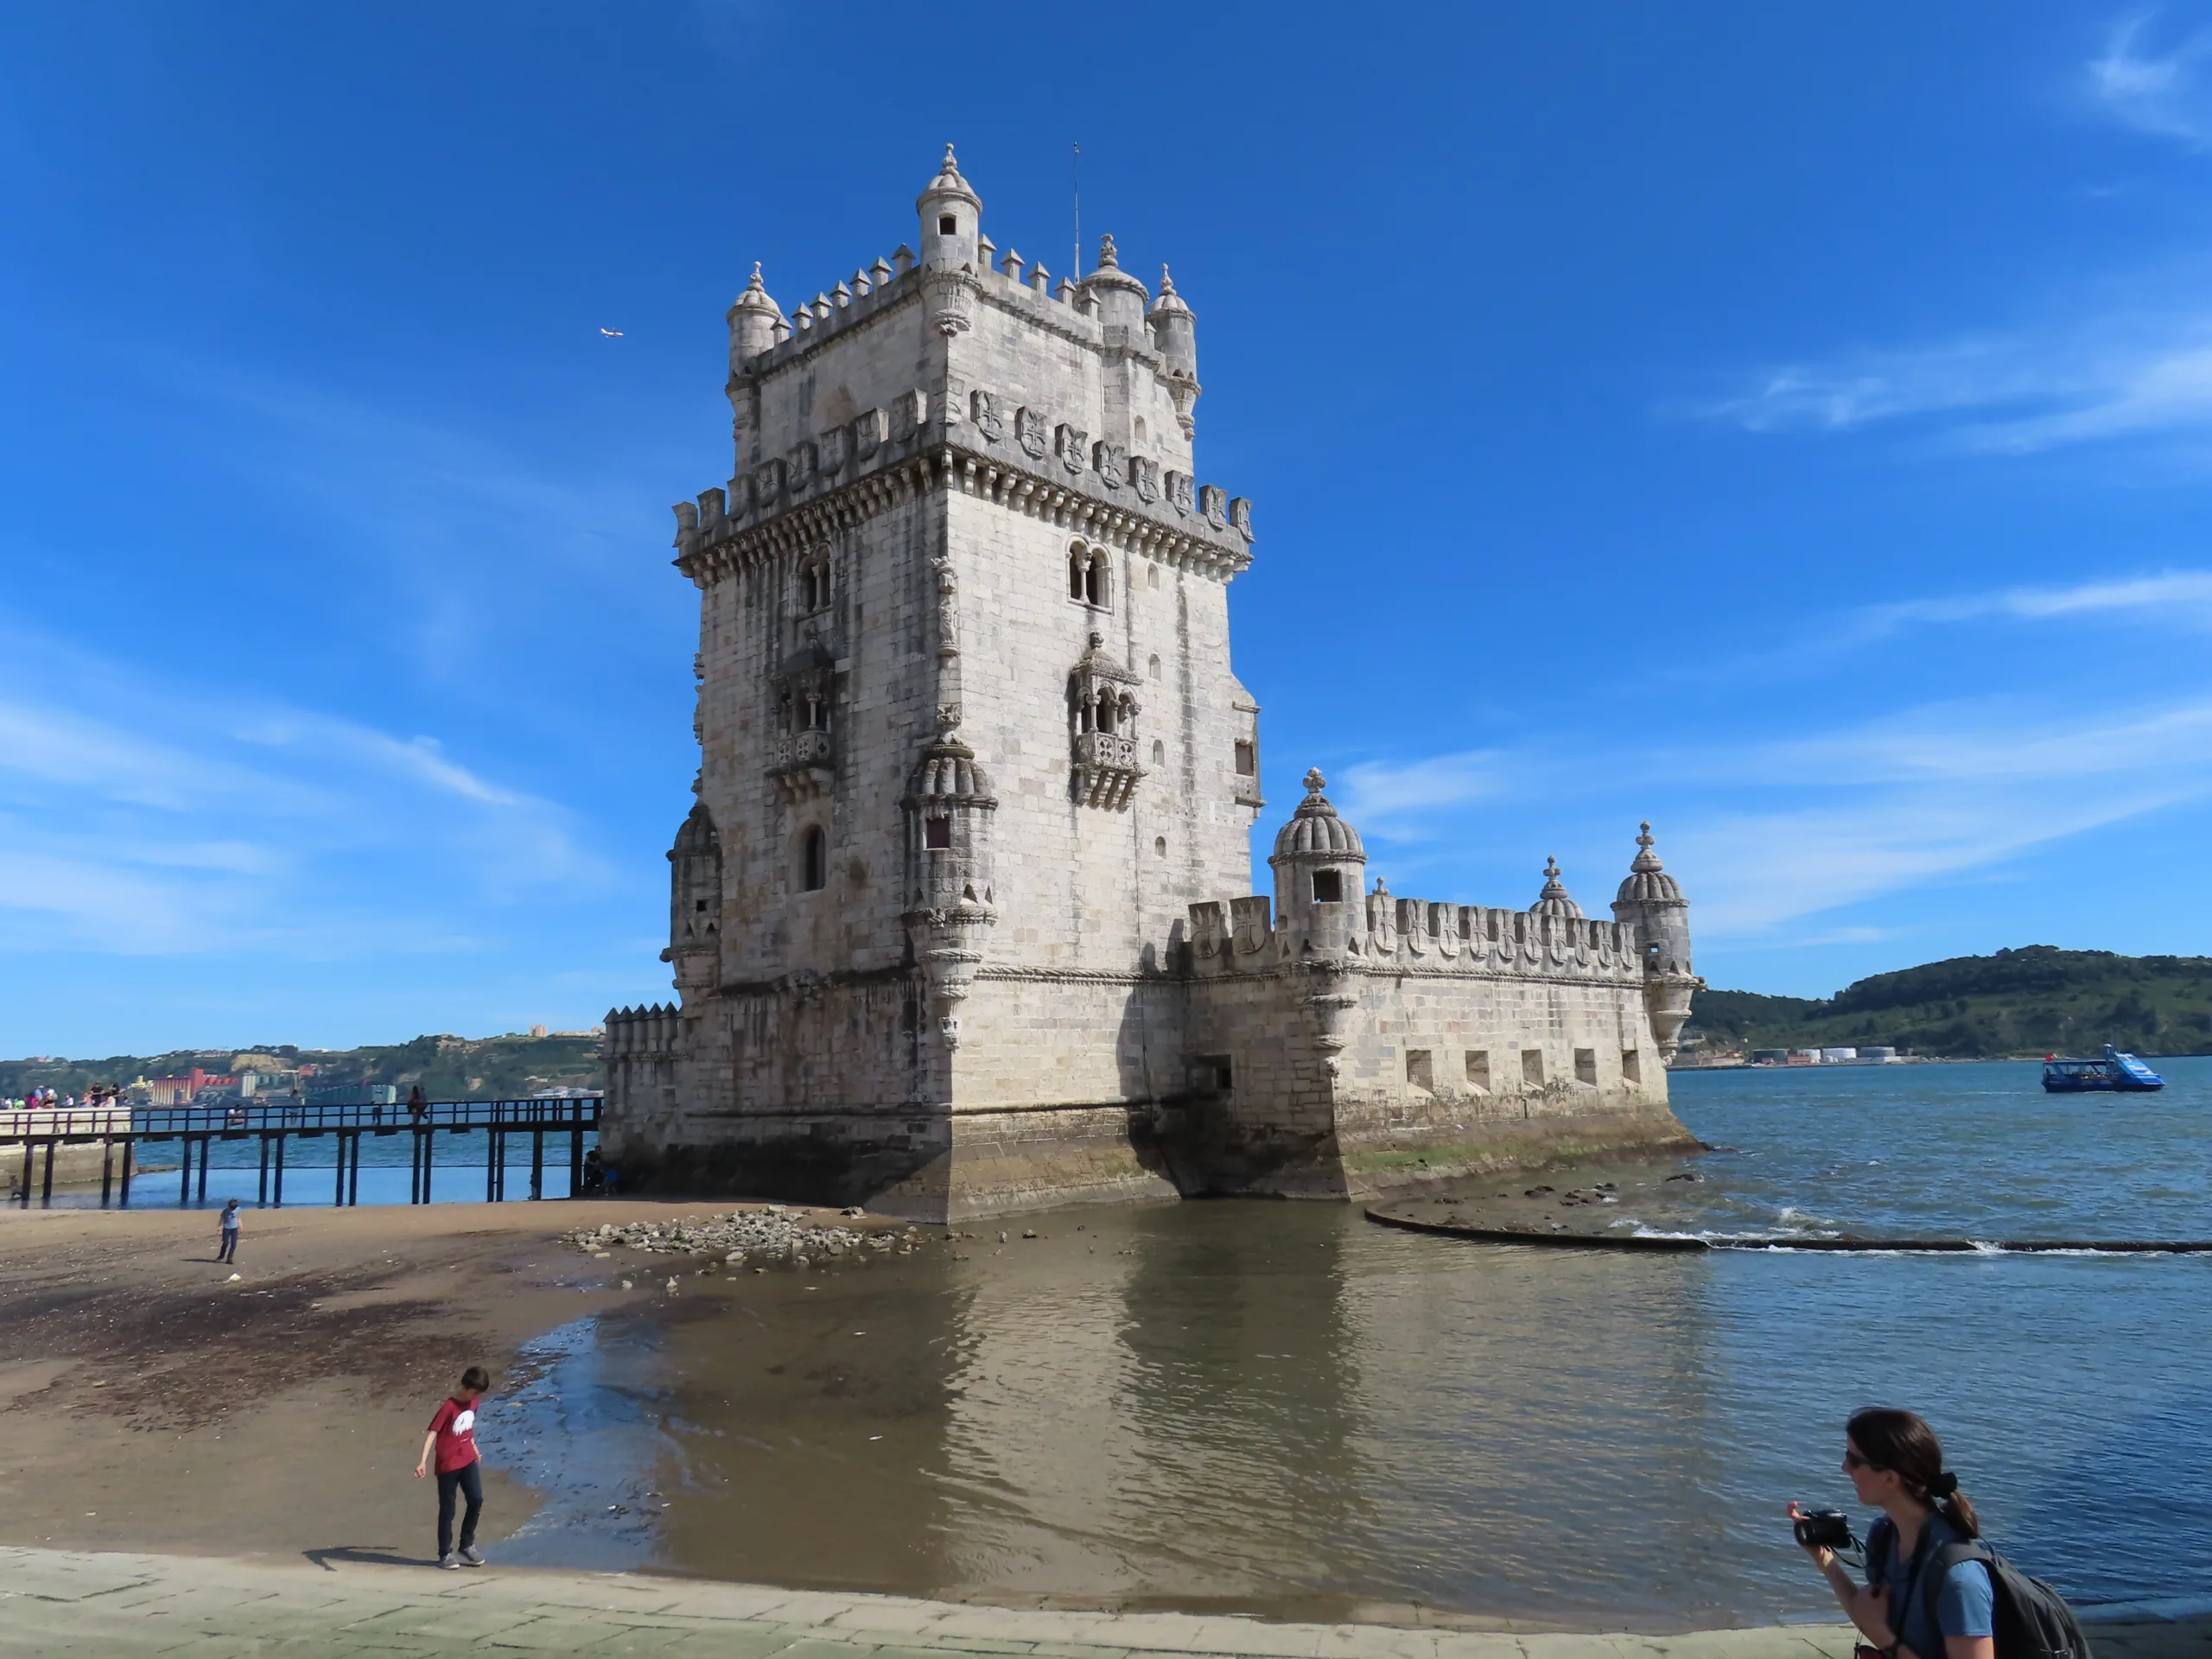 Real traveller photo of the Belém Tower